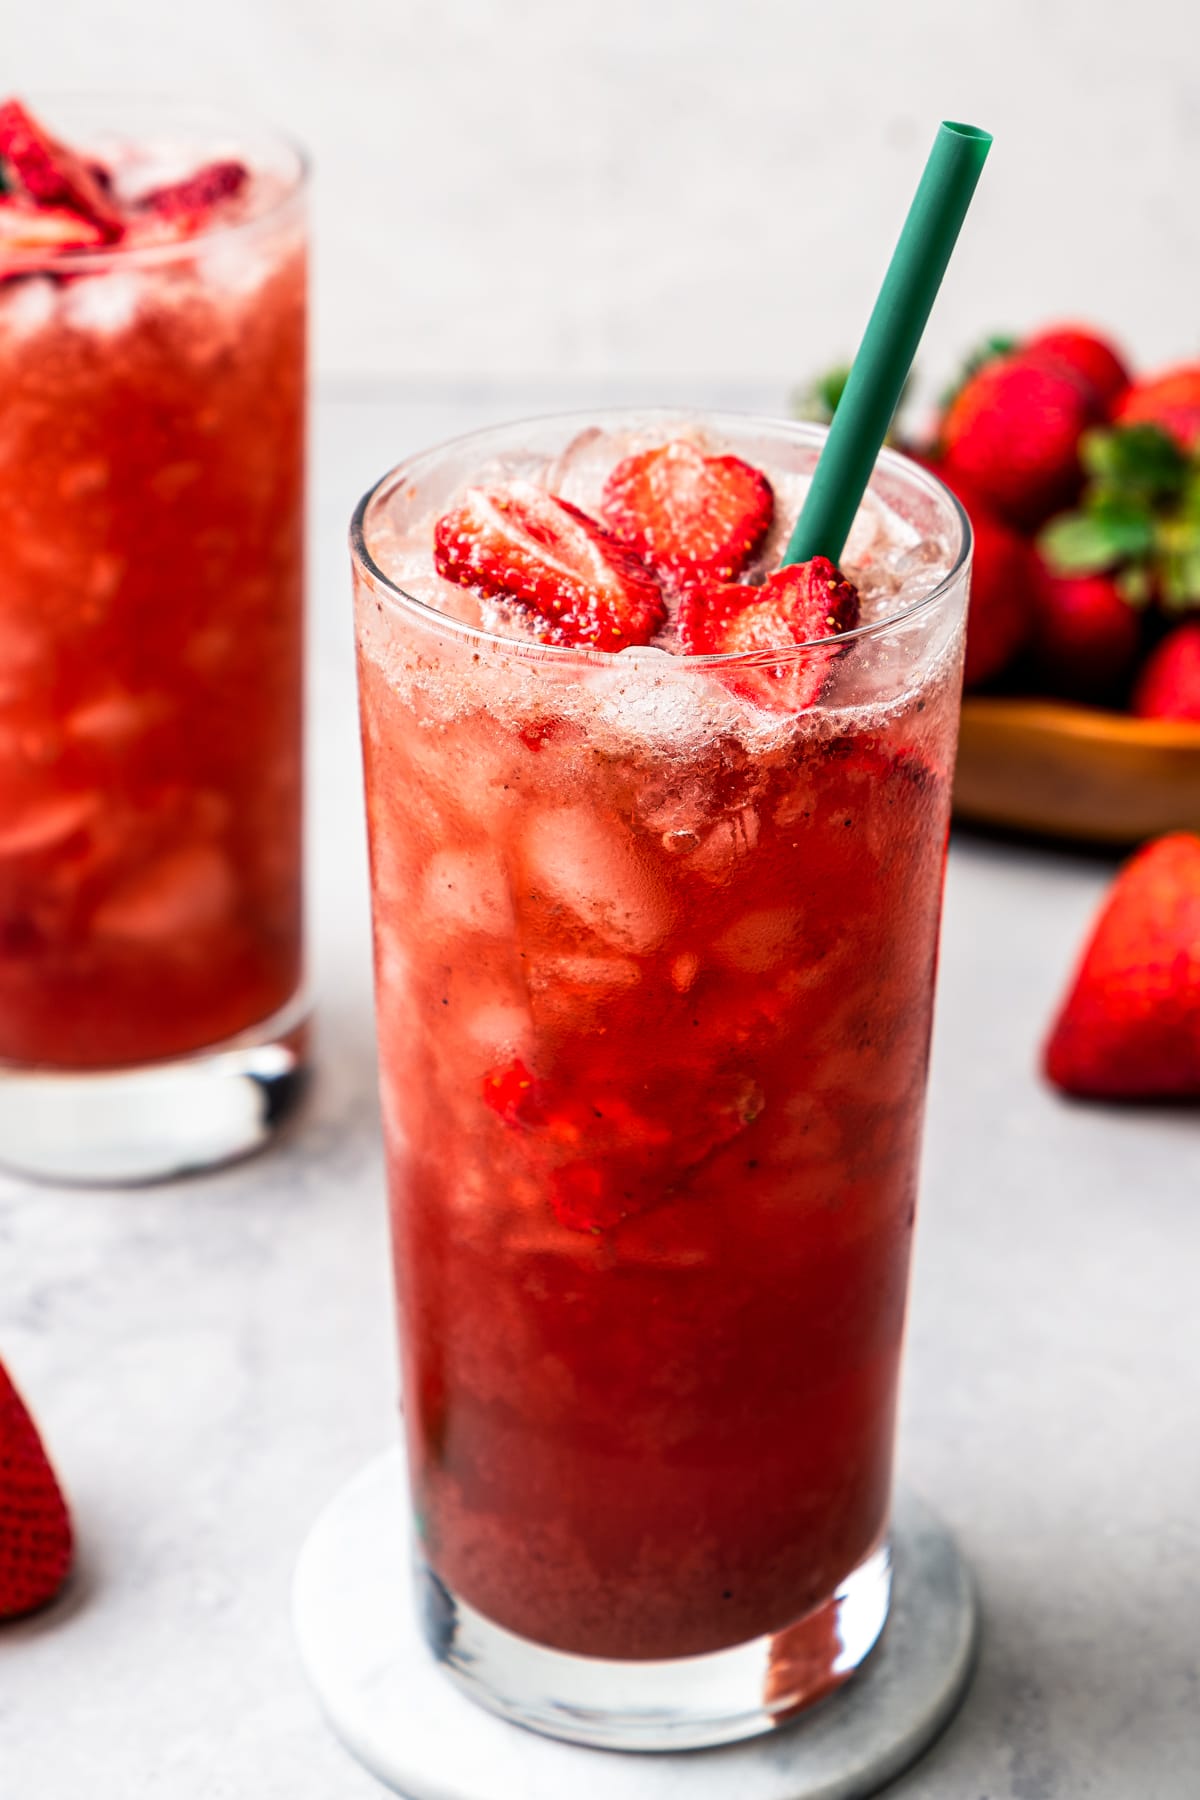 Two homemade Strawberry Acai Refreshers served in drinking glasses garnished with freeze-dried strawberries.